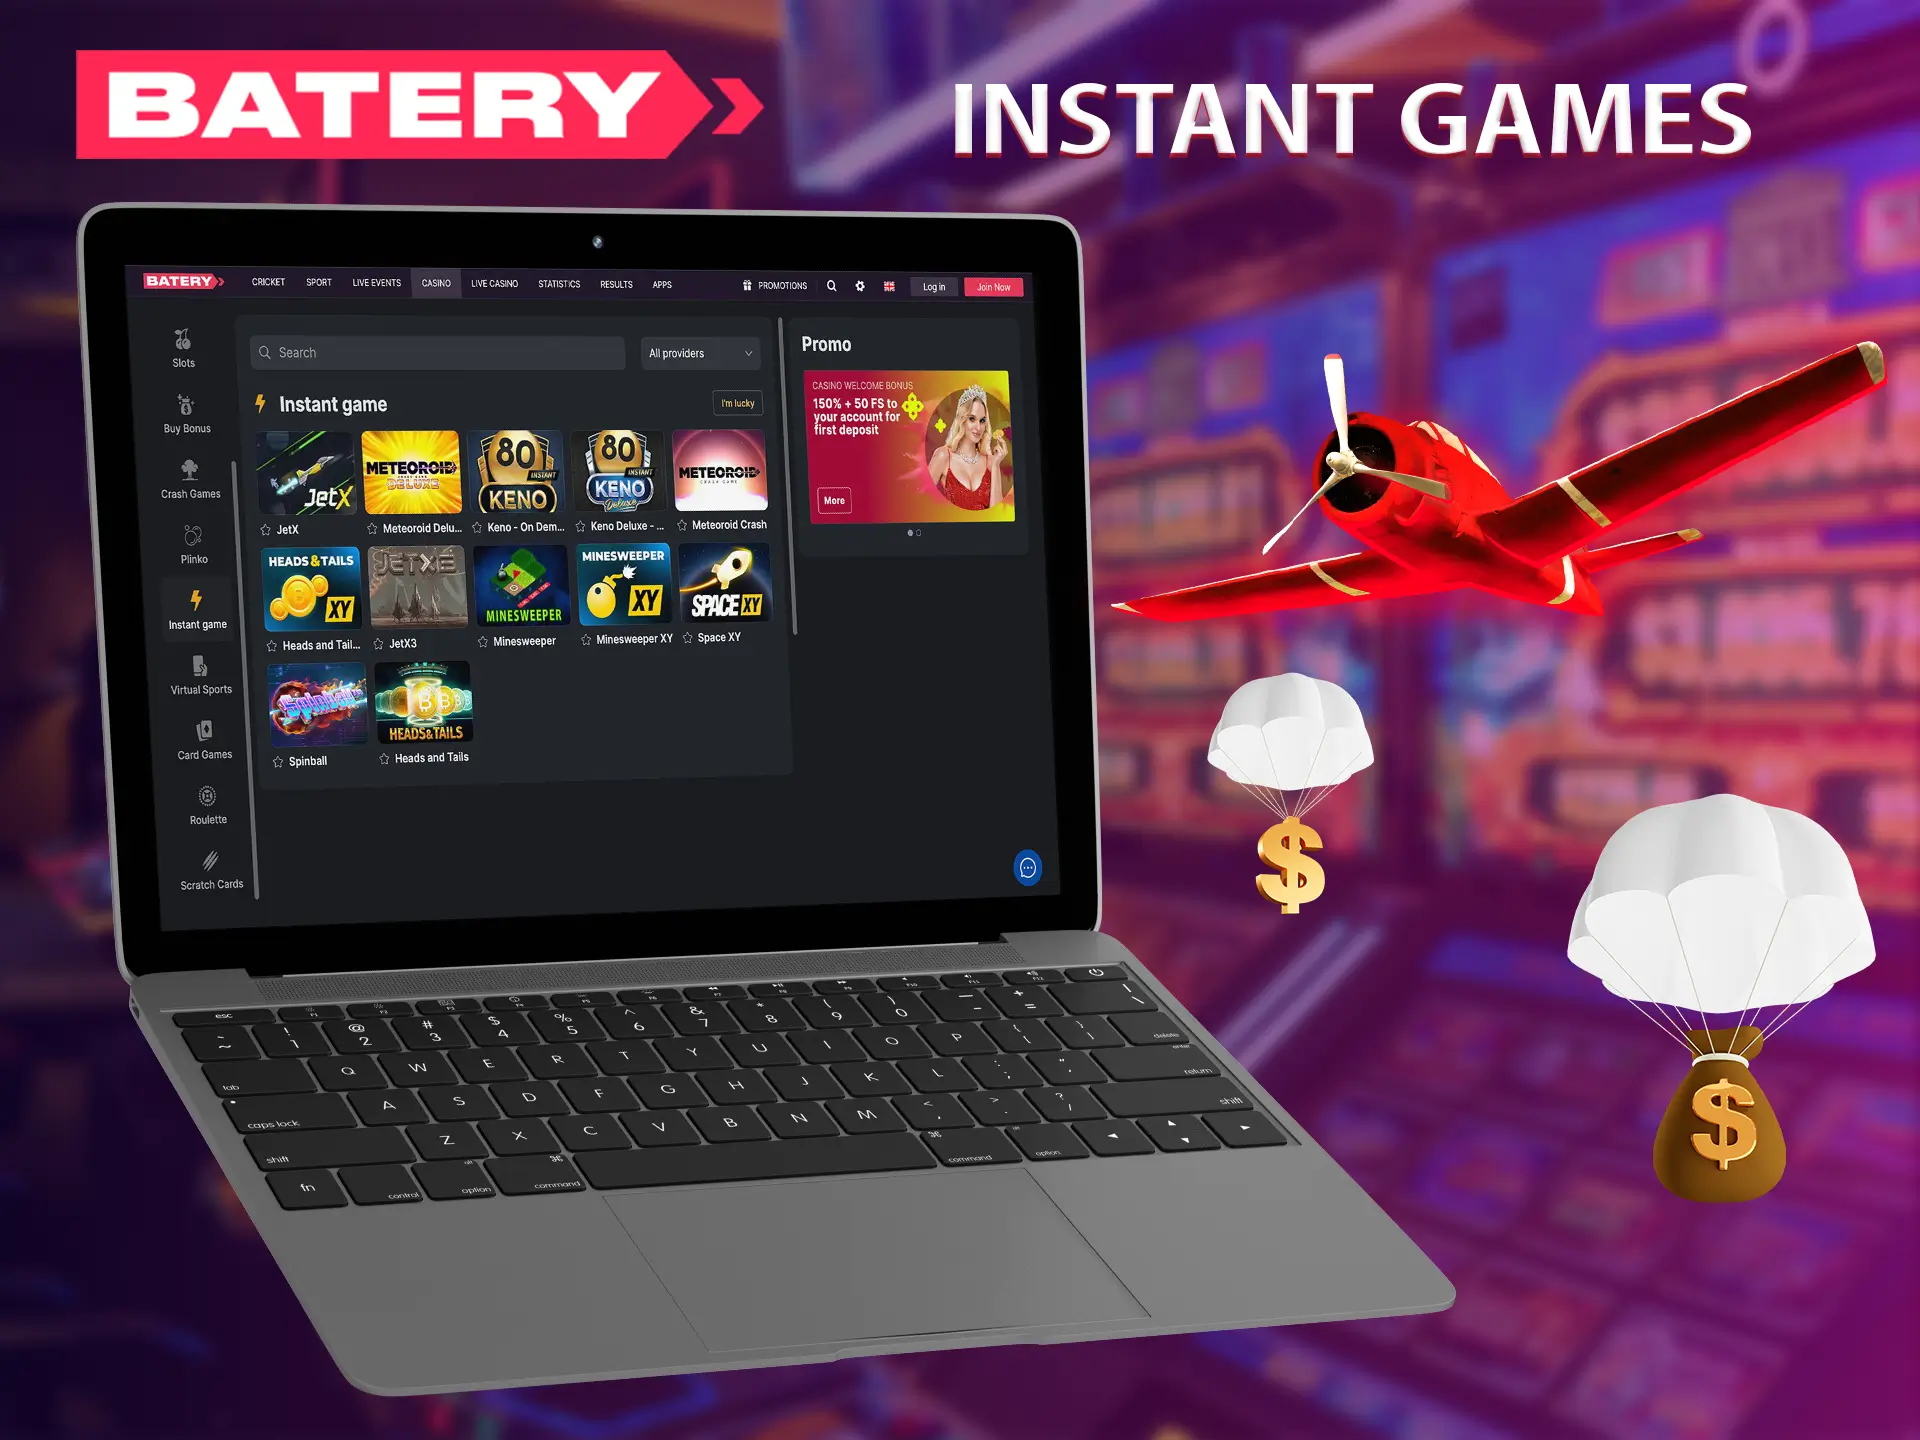 Instant games offer the player quick winnings and real emotions of excitement.